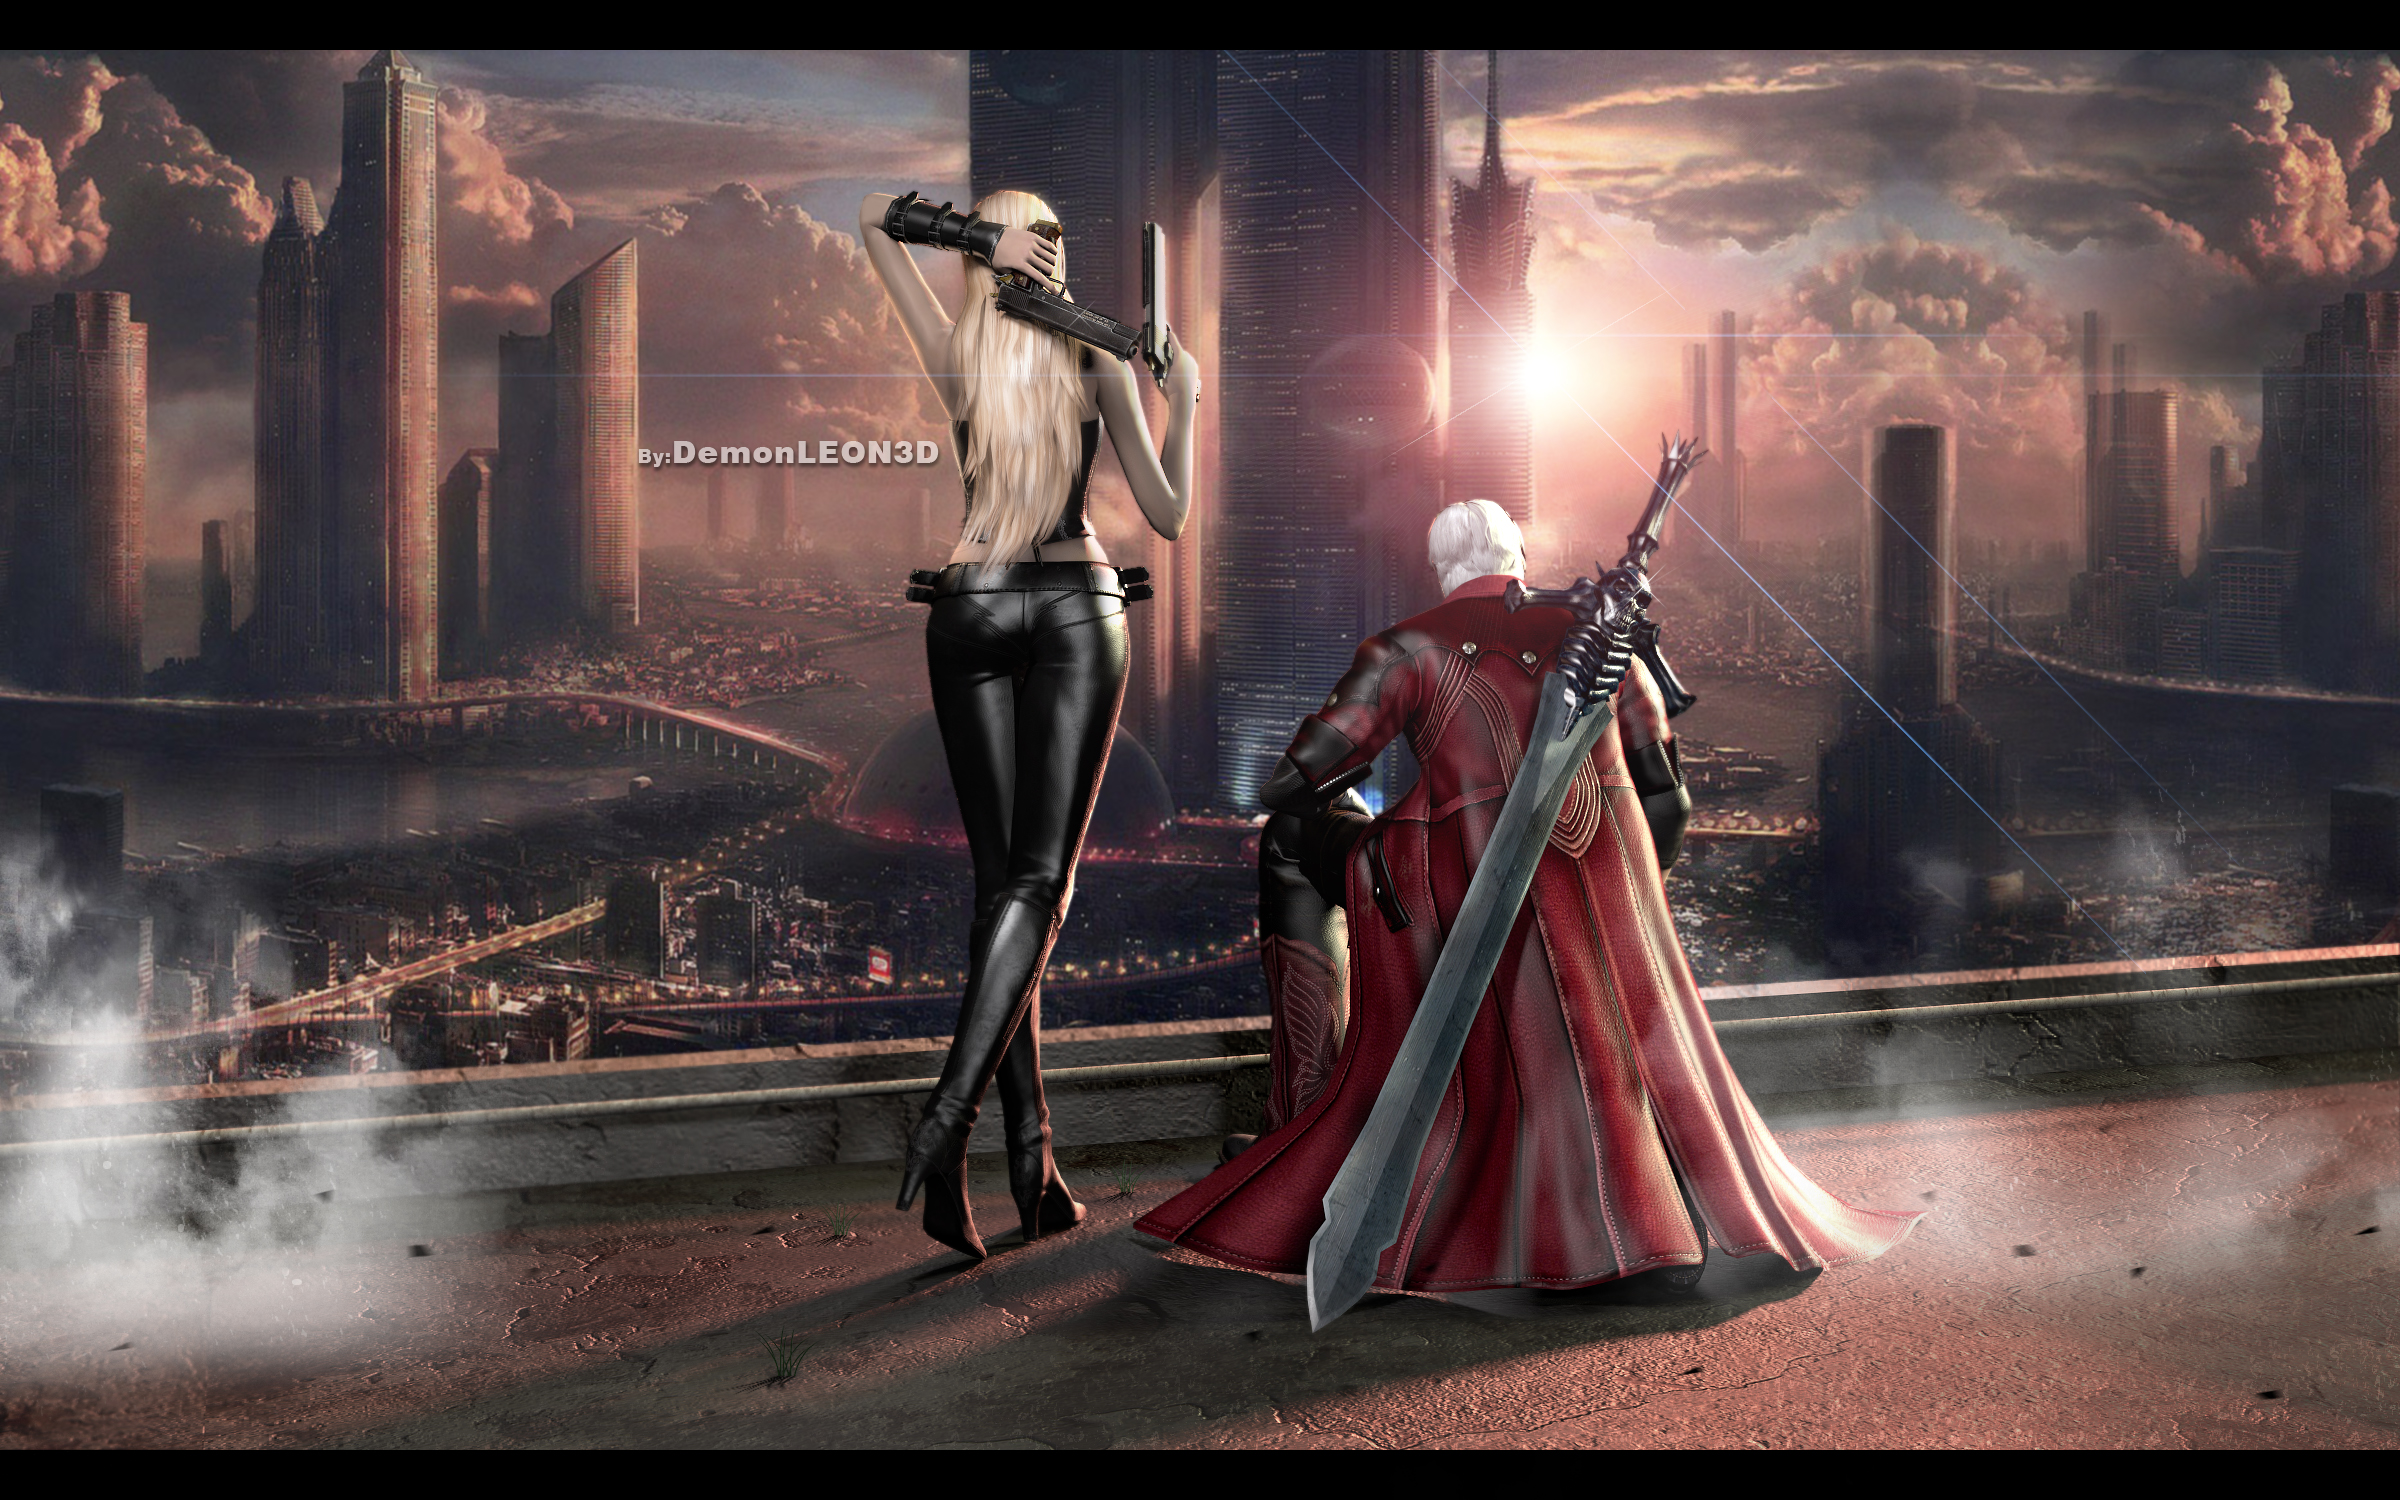 devil may cry, images, image, wallpaper, photos, photo, photograph, gallery...